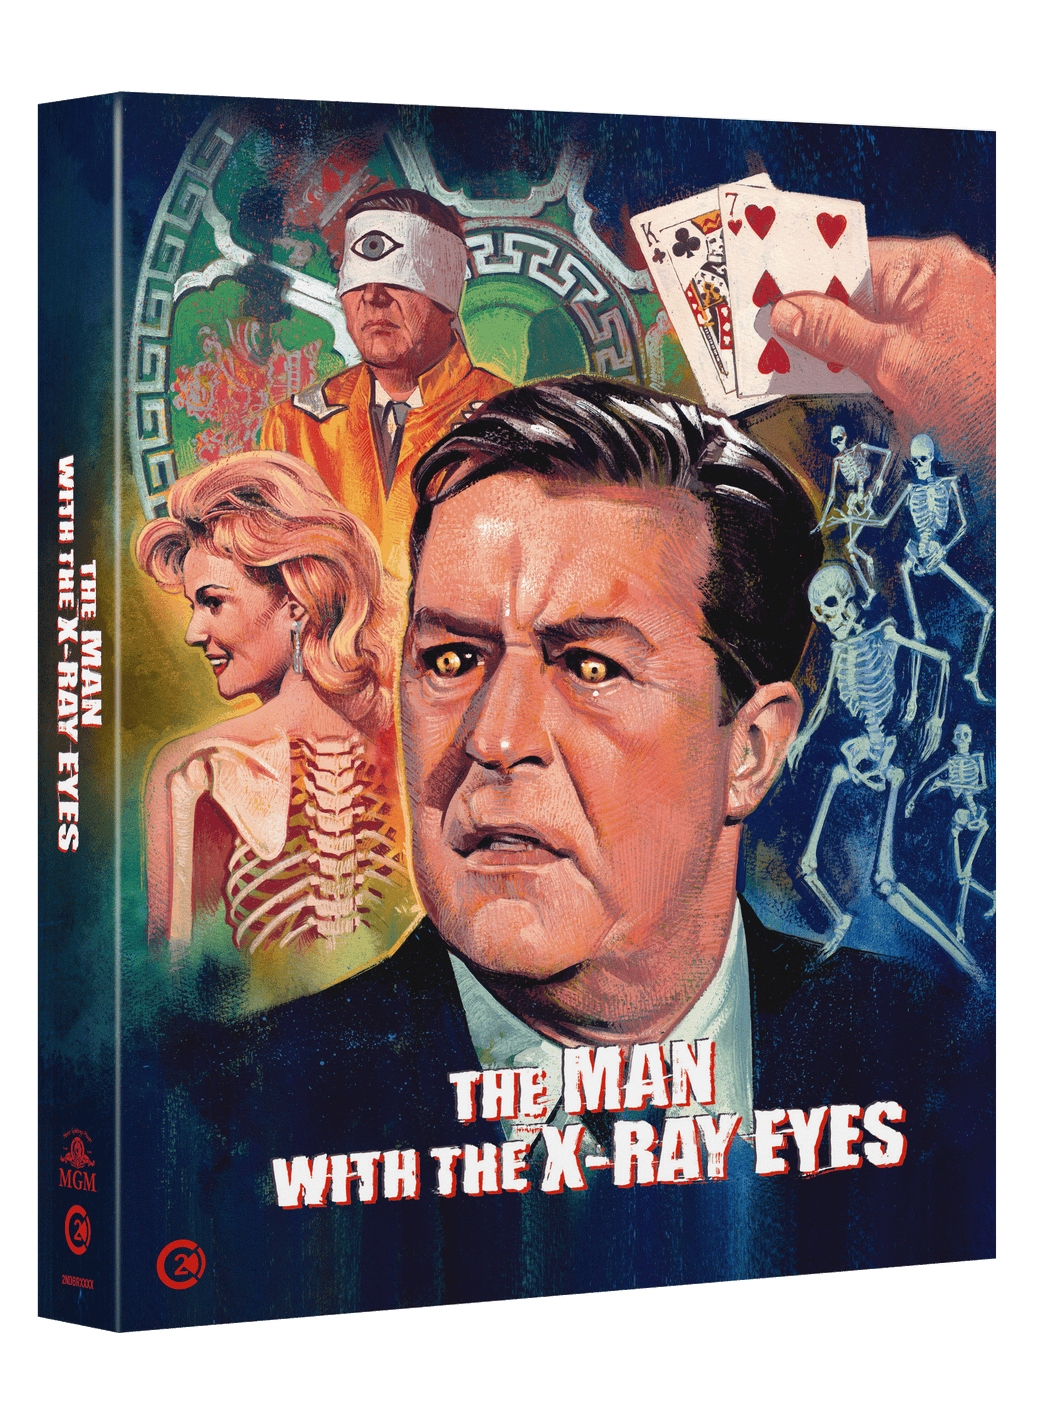 The Man With the X-Ray Eyes Limited Edition